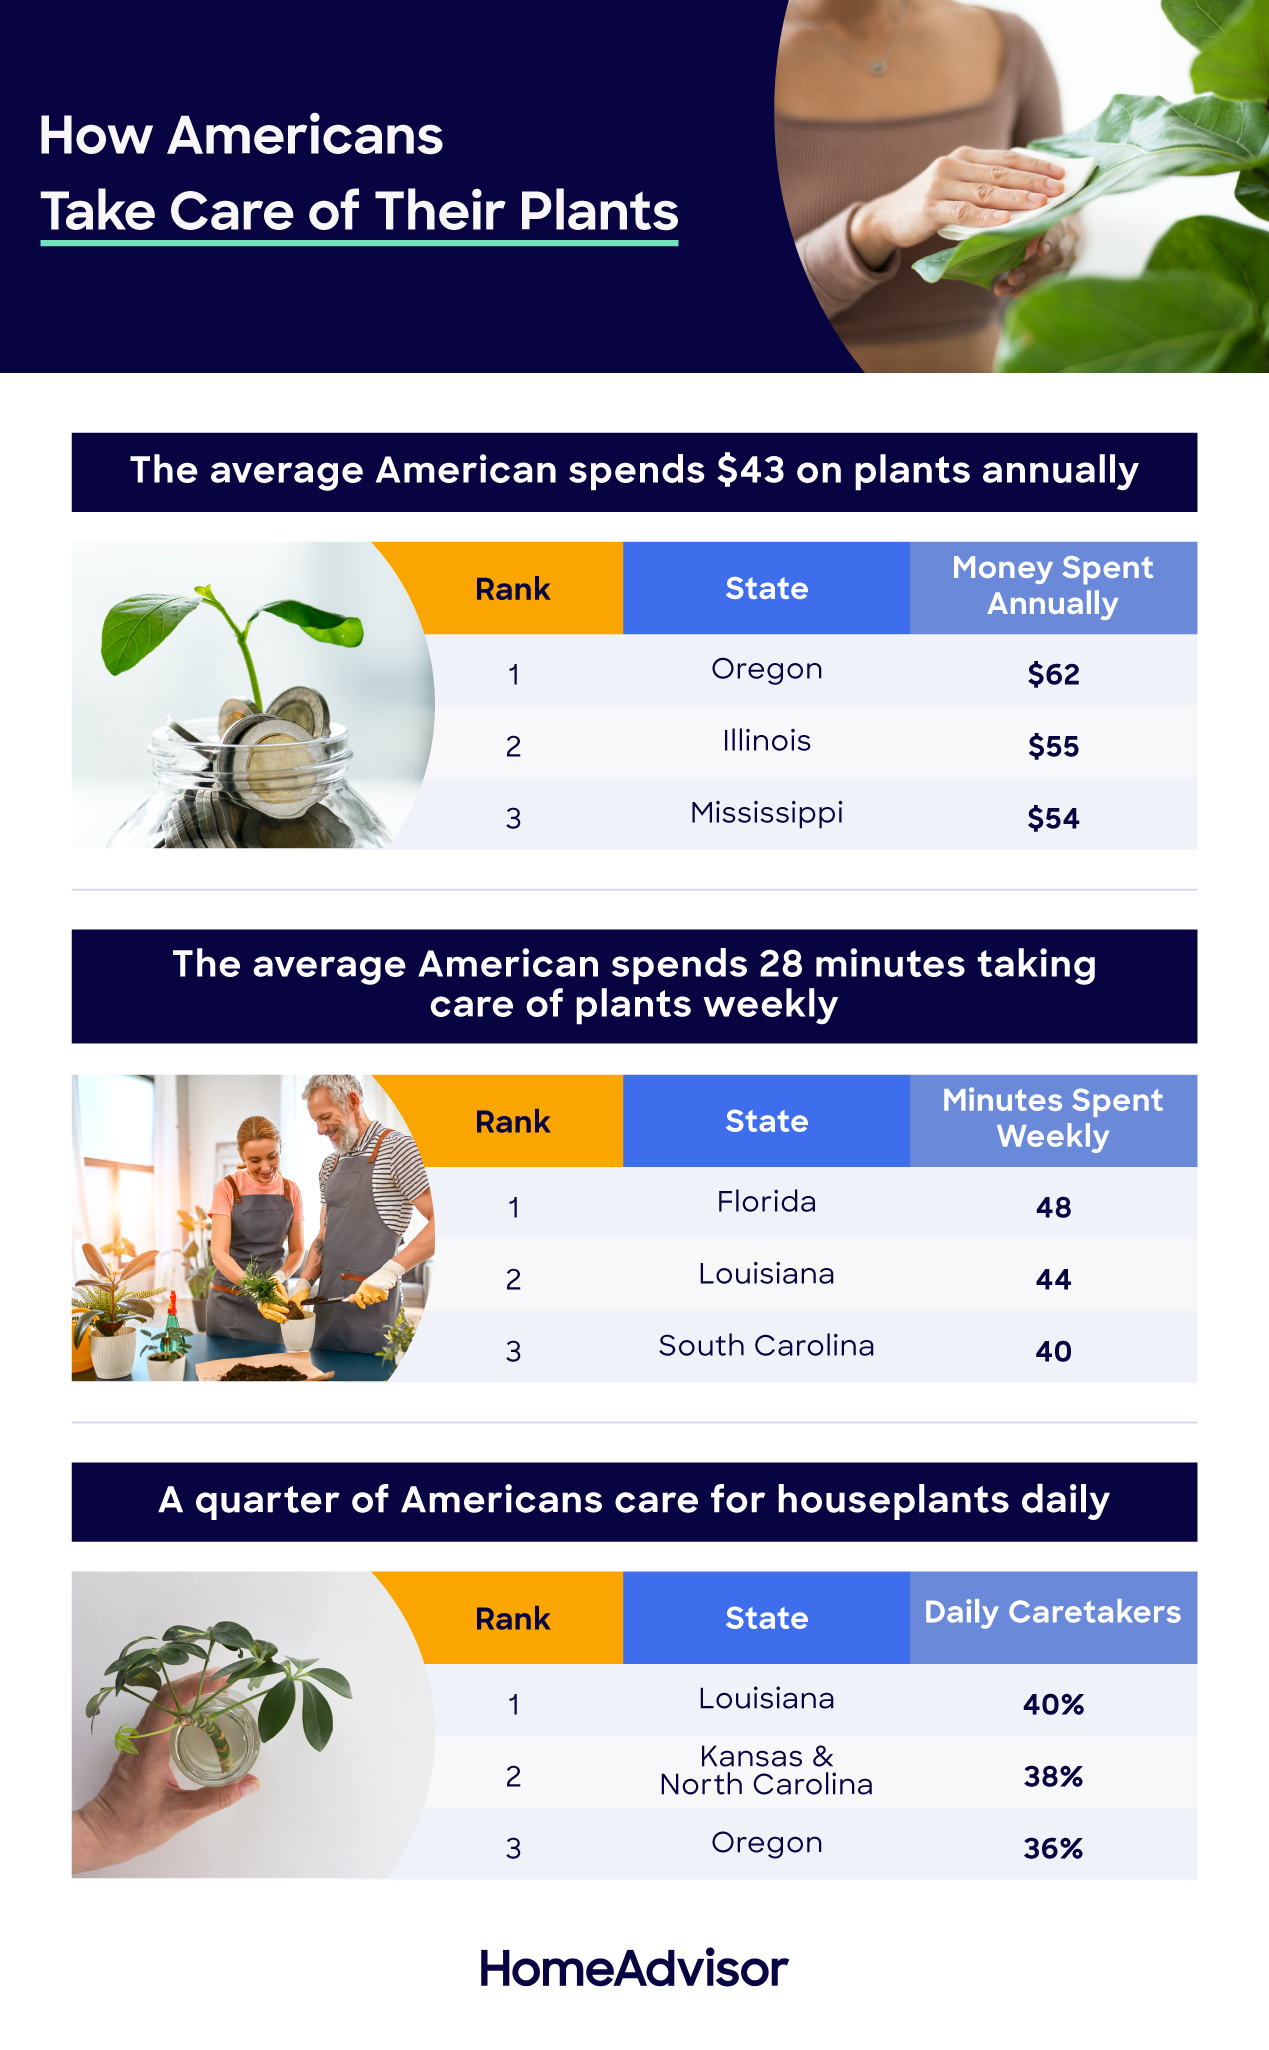 how Americans take care of plants